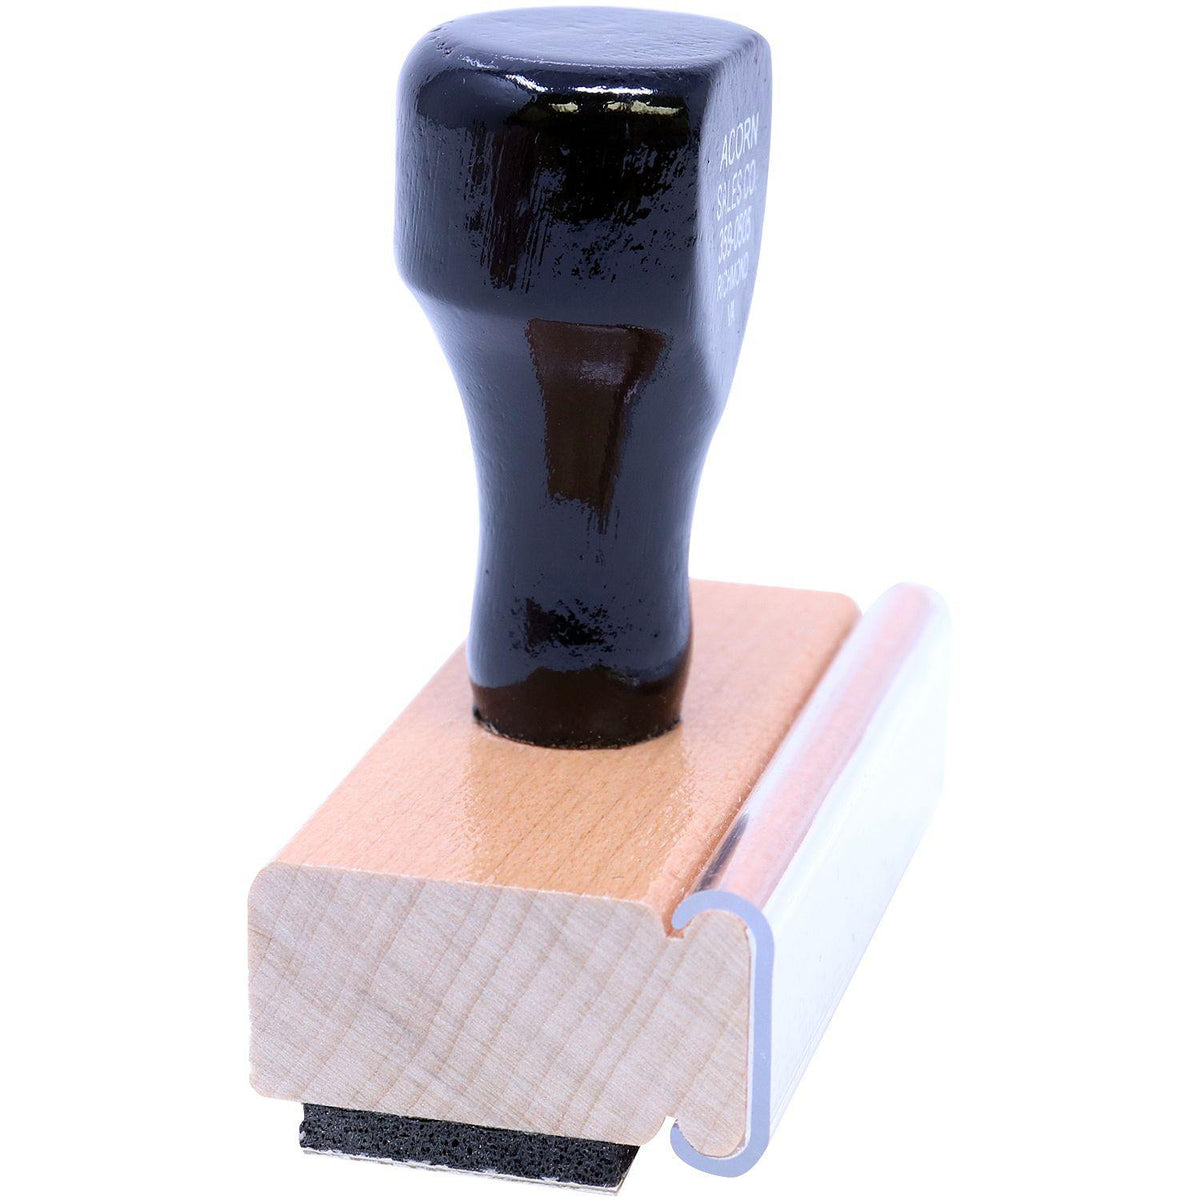 Side View of Large Please See Me Rubber Stamp at an Angle